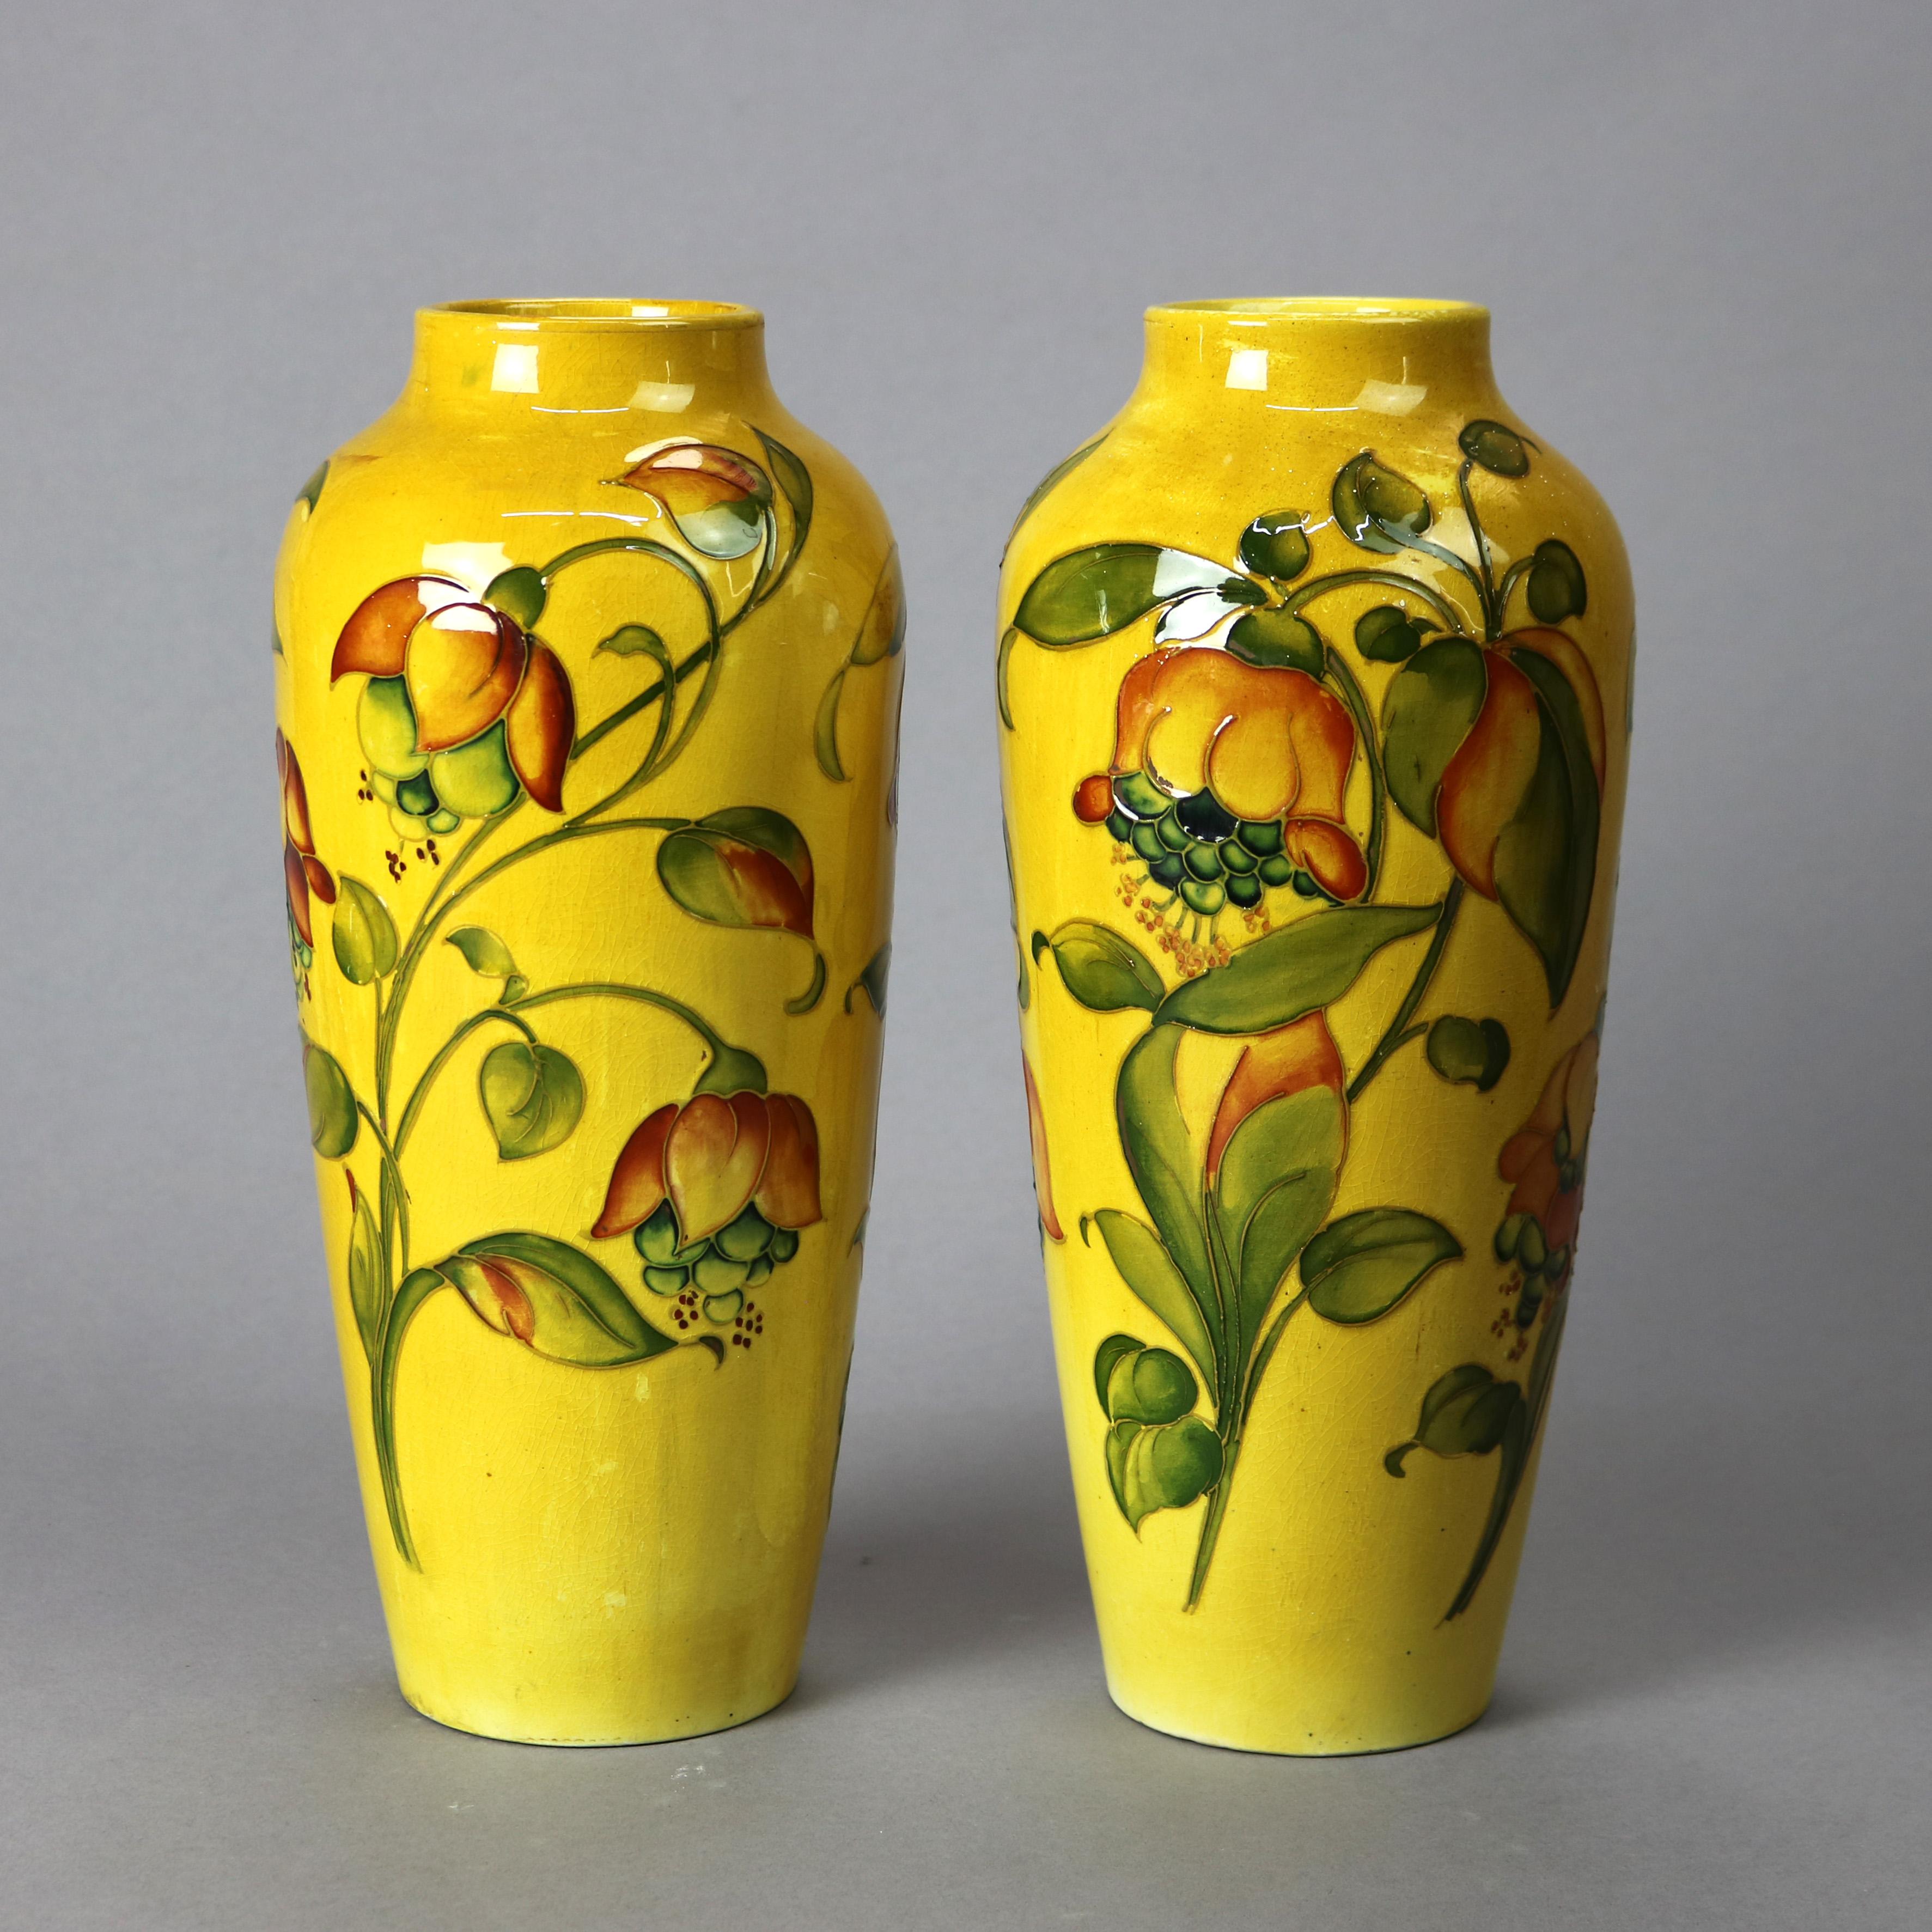 An antique Arts and Crafts pair of vase by Moorcroft offer art pottery construction with hand painted floral design, maker mark as photographed, drilled holes in bases, circa 1910

Measures 12